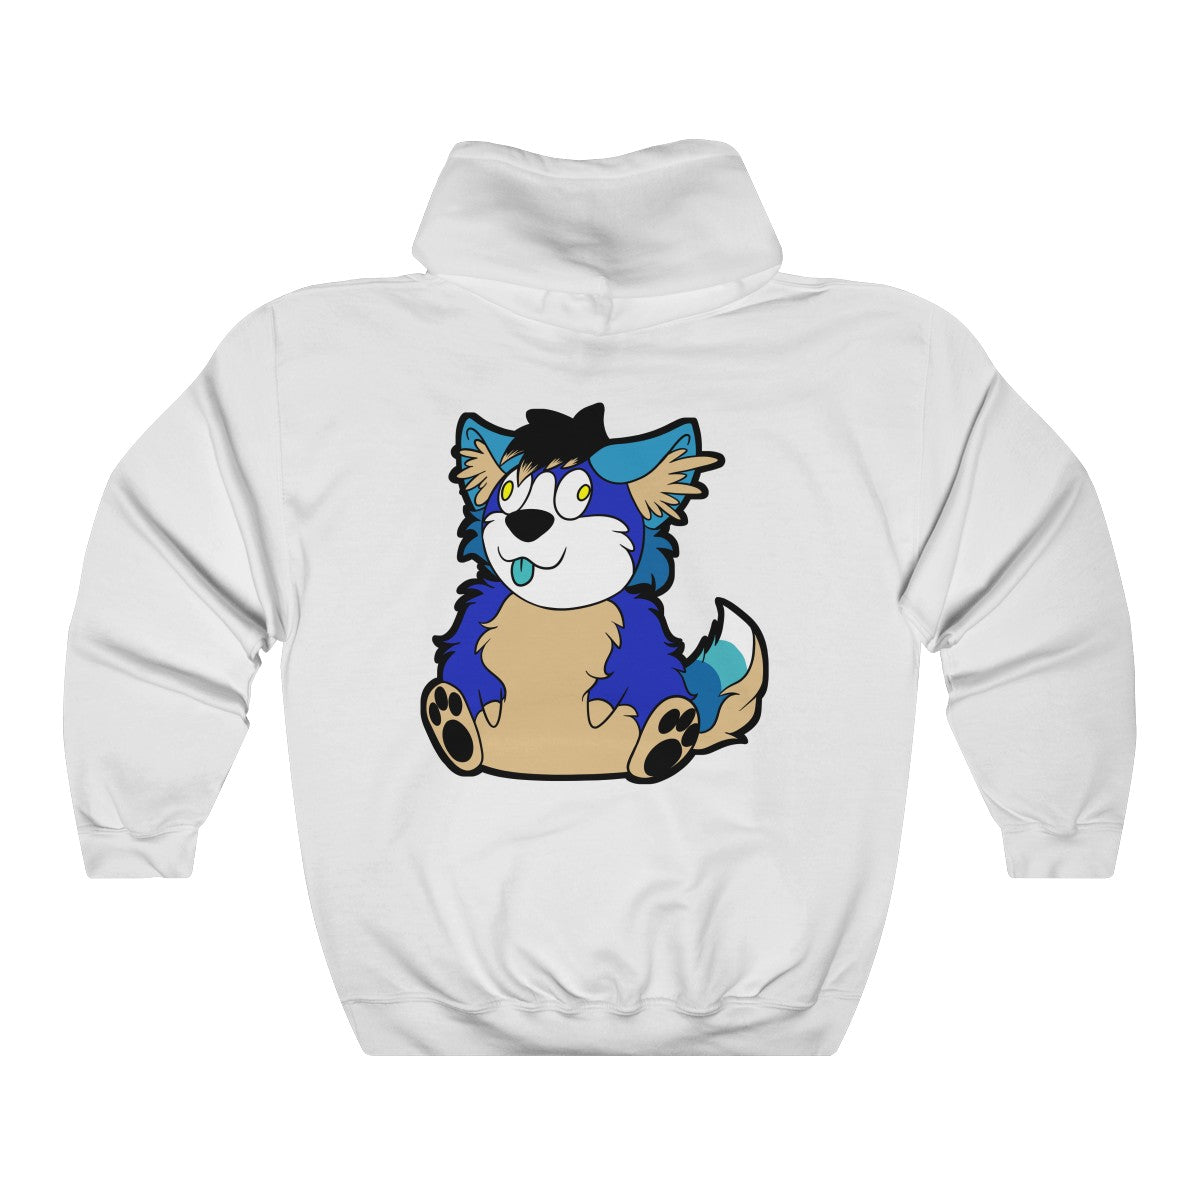 Thicc Boi No Text - Hoodie Hoodie AFLT-Hund The Hound White S 